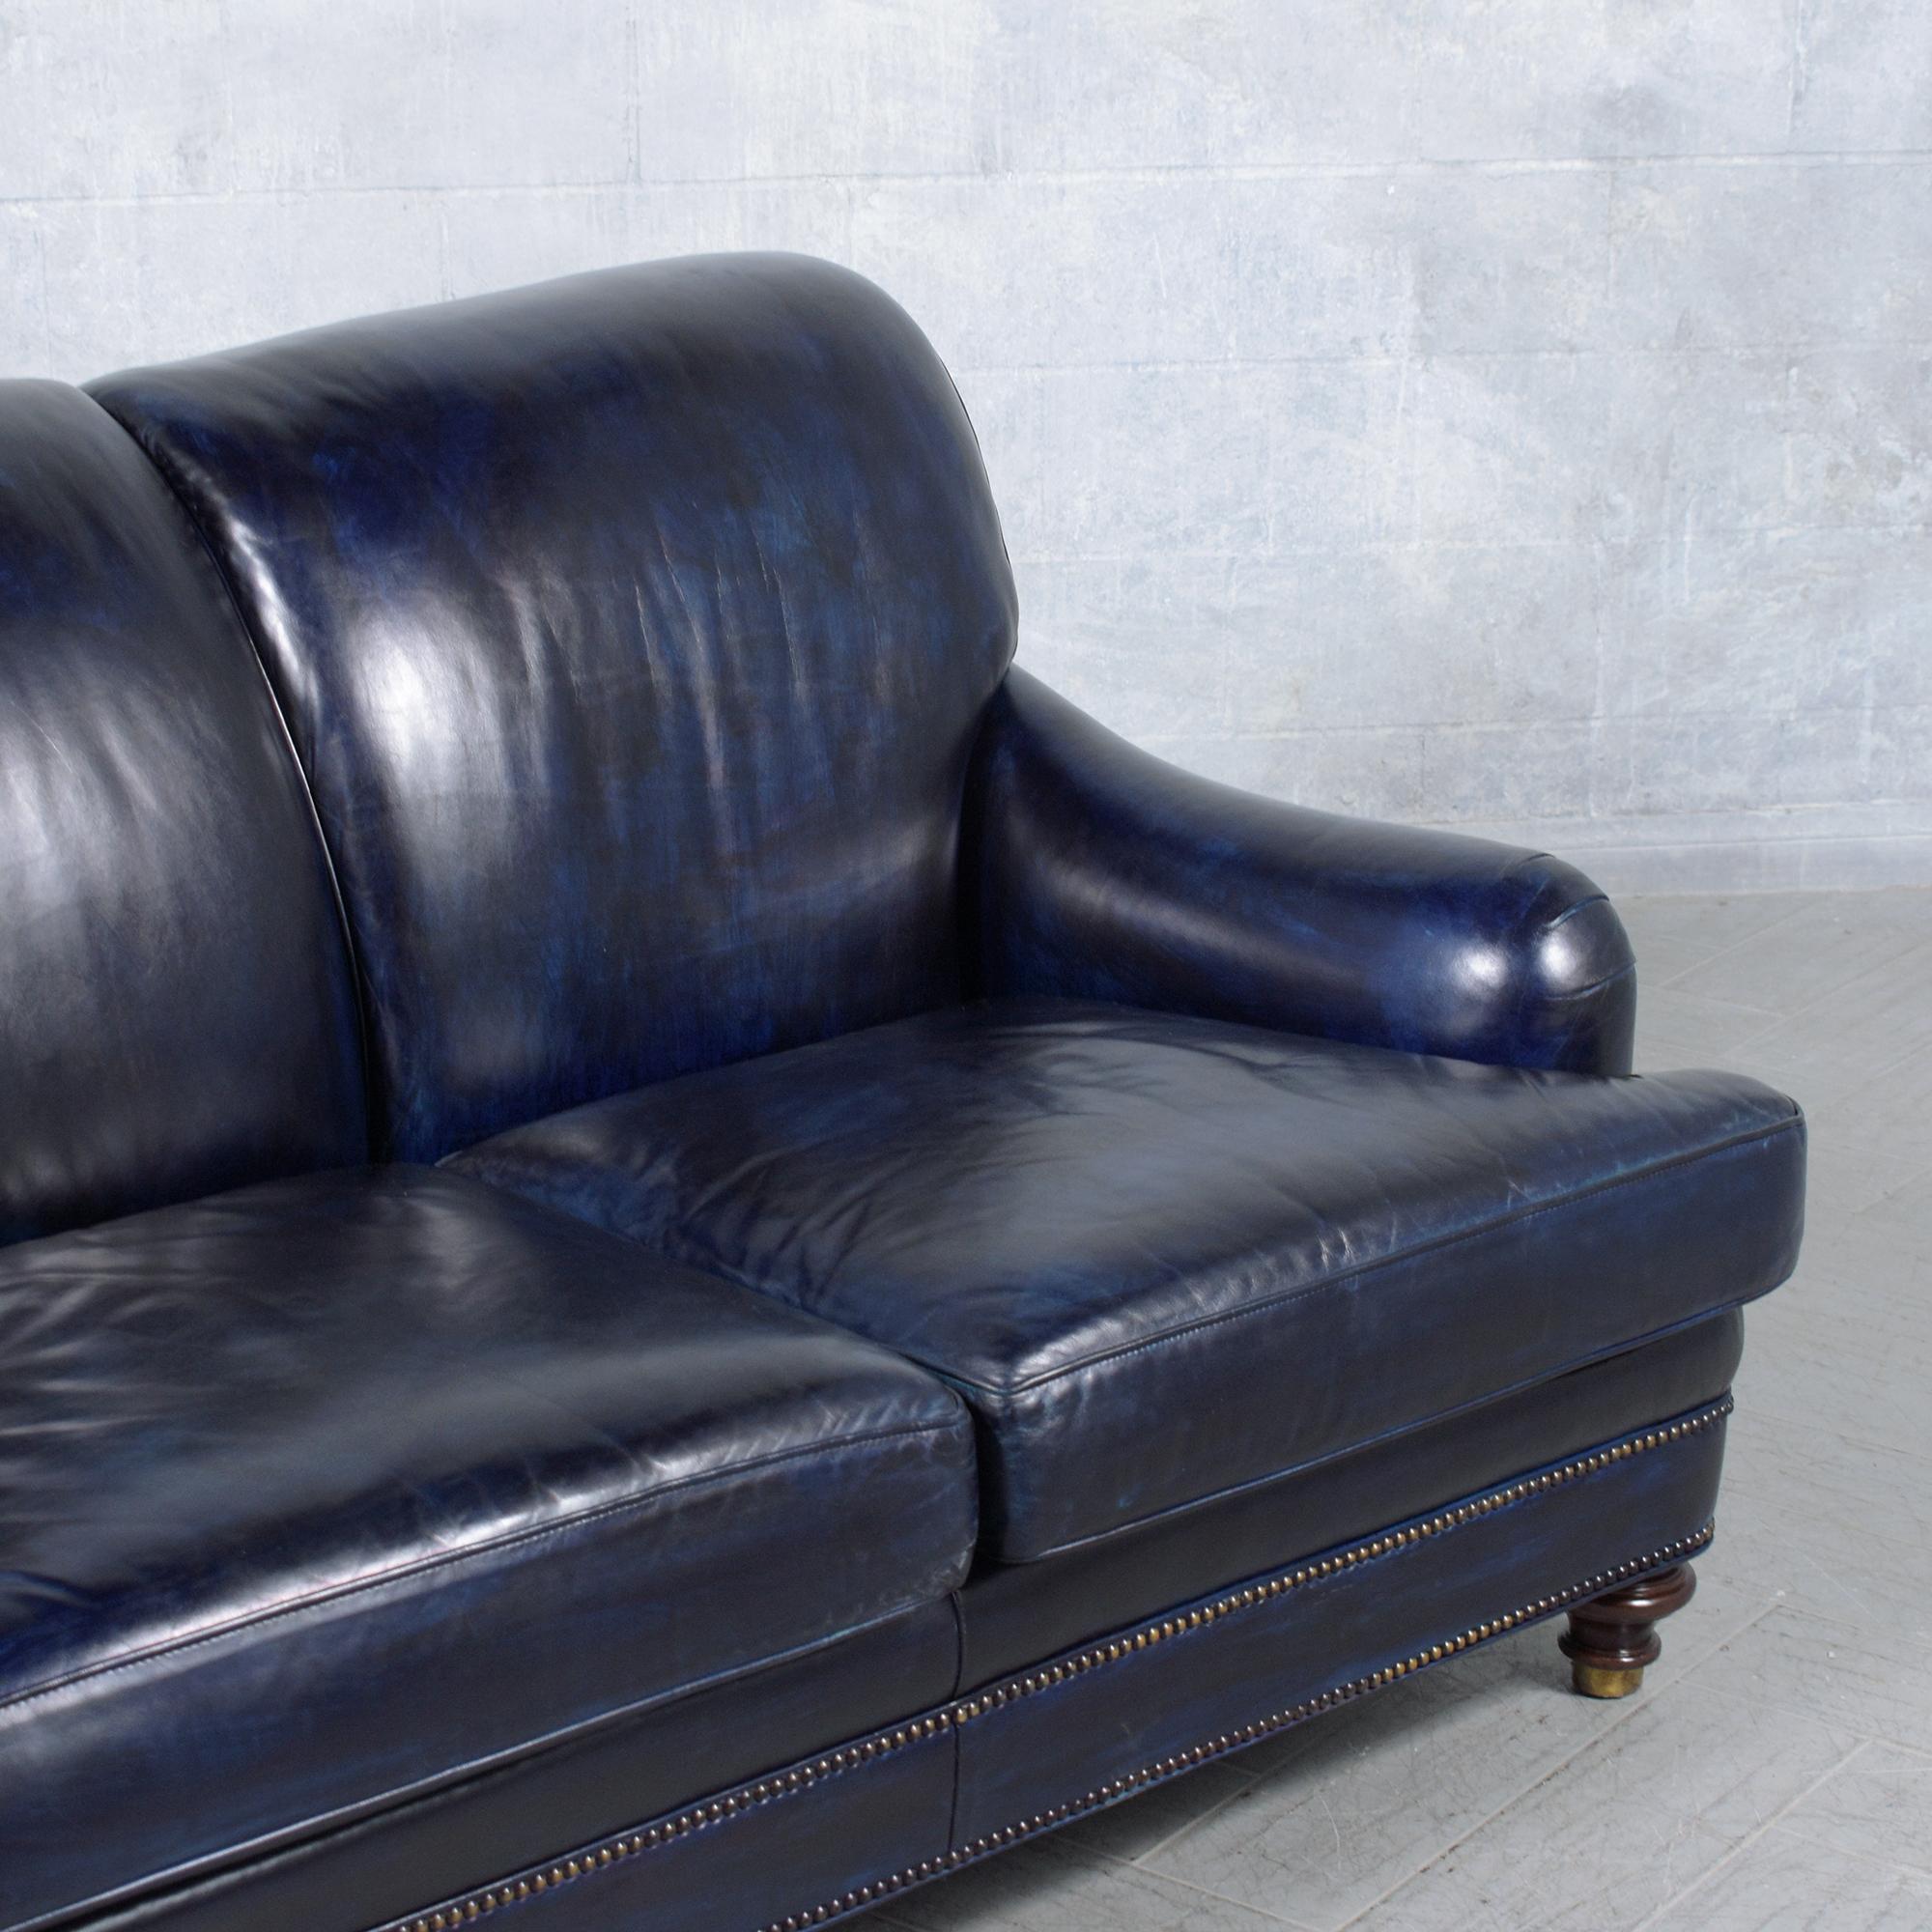 Hancock & Moore Loveseat: Classic English Elegance in Navy Blue Leather 1